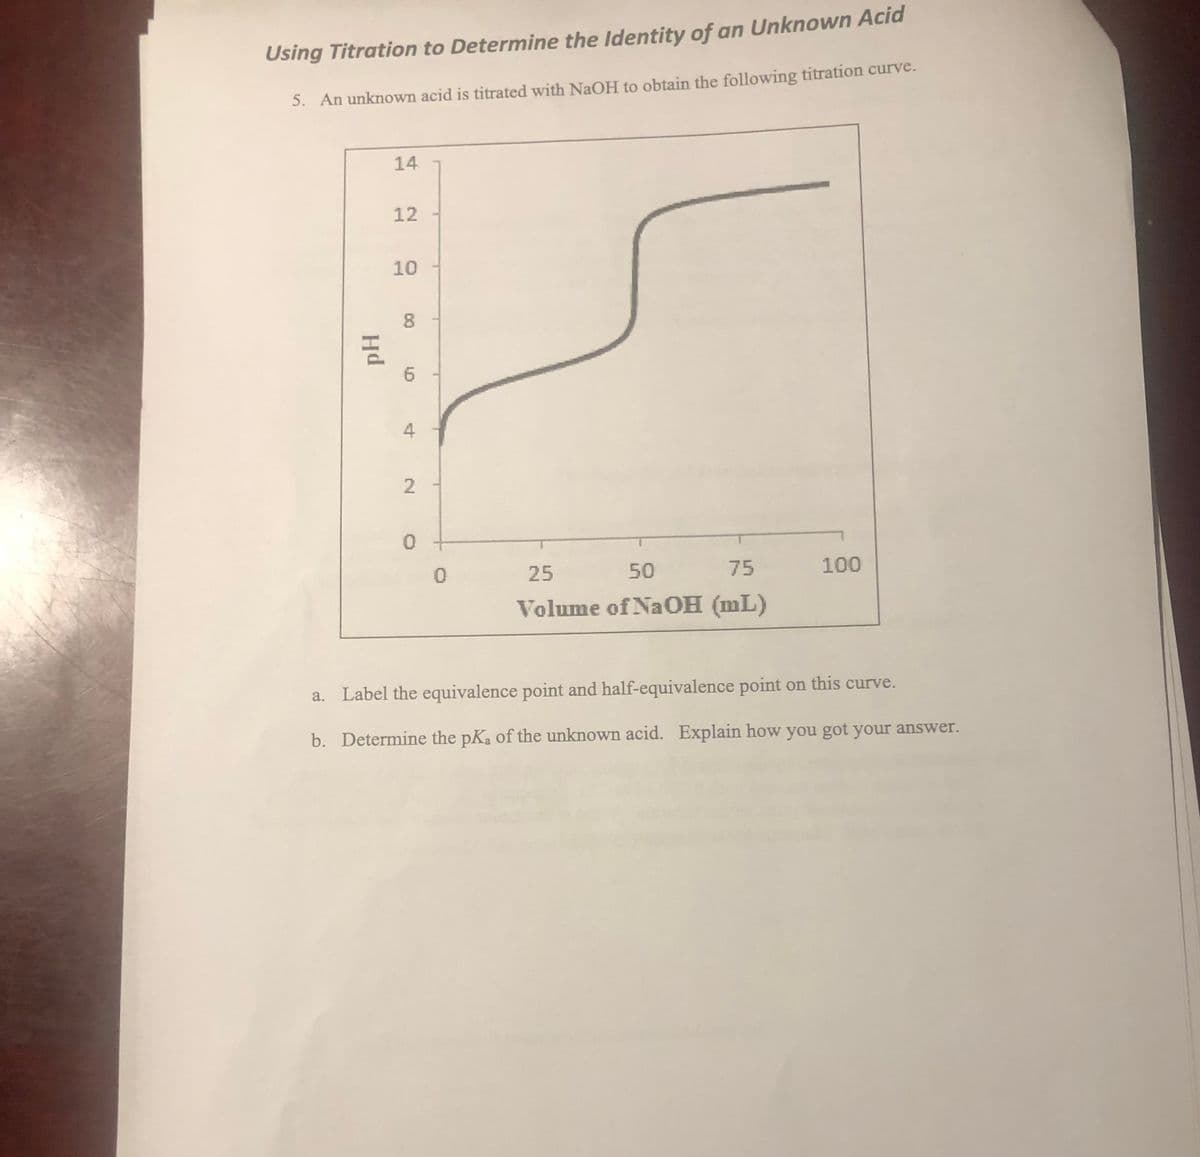 Using Titration to Determine the Identity of an Unknown Acid
5. An unknown acid is titrated with NaOH to obtain the following titration curve.
Hd
14
12
10
8
6
4
2
0
0
25
50
75
Volume of NaOH (mL)
100
Label the equivalence point and half-equivalence point on this curve.
b. Determine the pKa of the unknown acid. Explain how you got your answer.